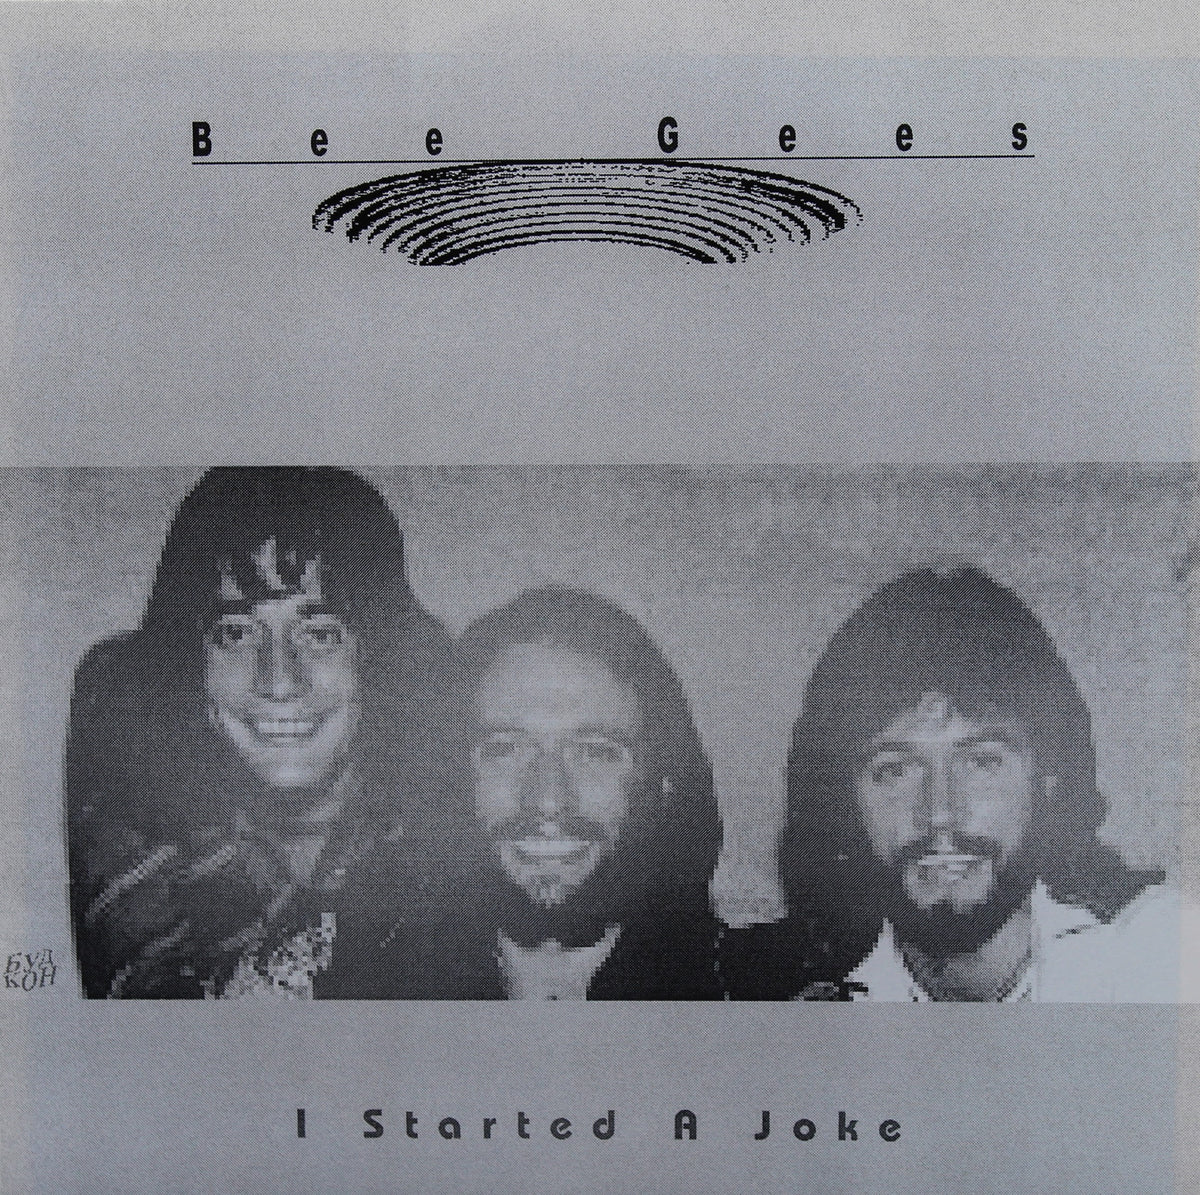 Bee Gees - I Started A Joke, Flexi-disc, 5½&quot;, 45 RPM, Single Sided, Unofficial Release, Mono, Russia